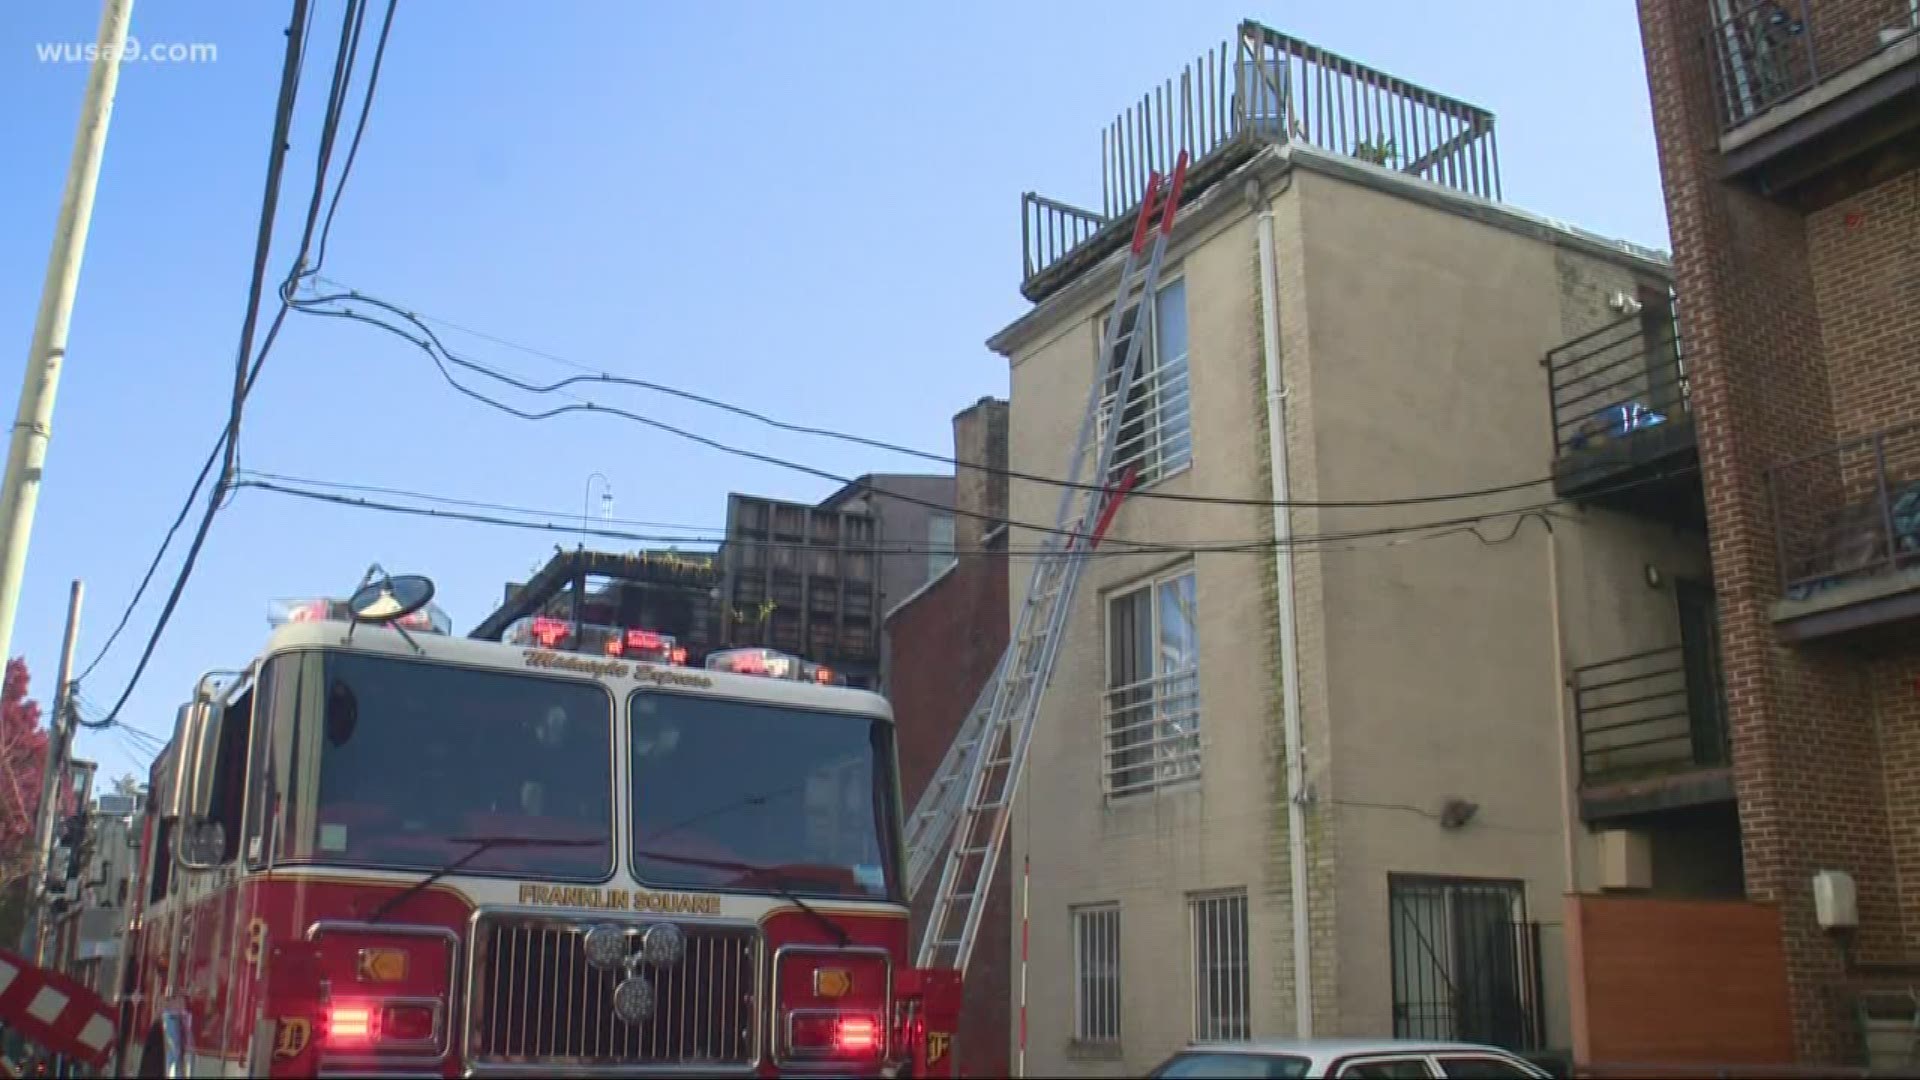 Residents from 20 units are displaced, according to officials.